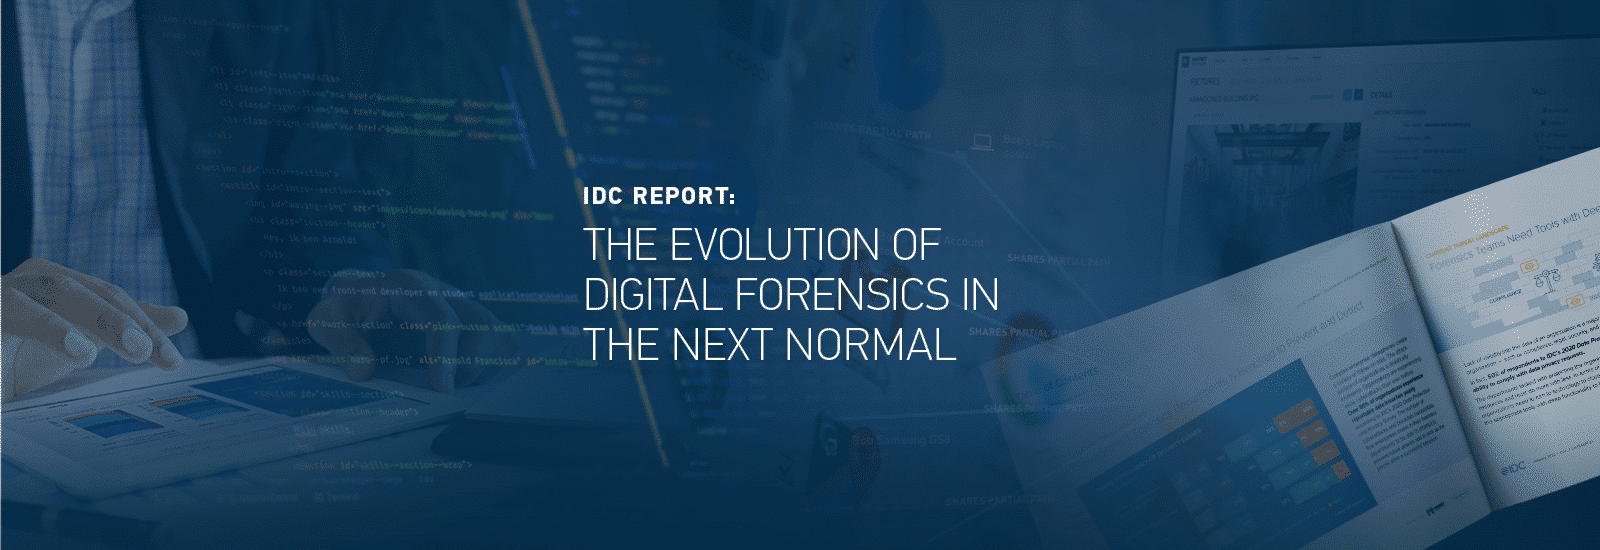 Blog header for the IDC Report: The Evolution of Digital Forensics in the Next Normal